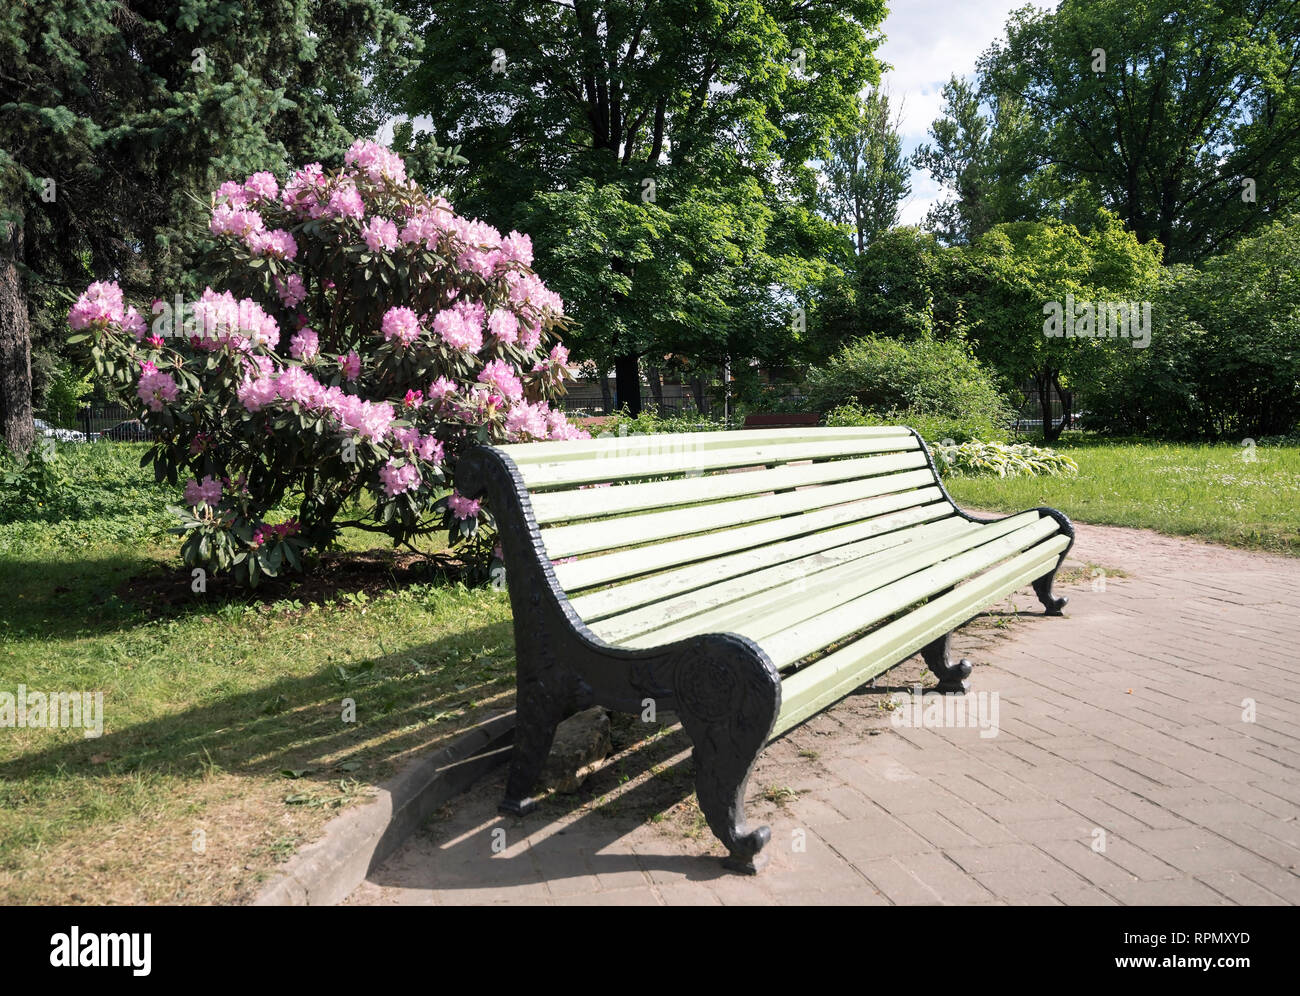 An empty bench in the garden with a flowering Rhododendron Bush. Stock Photo